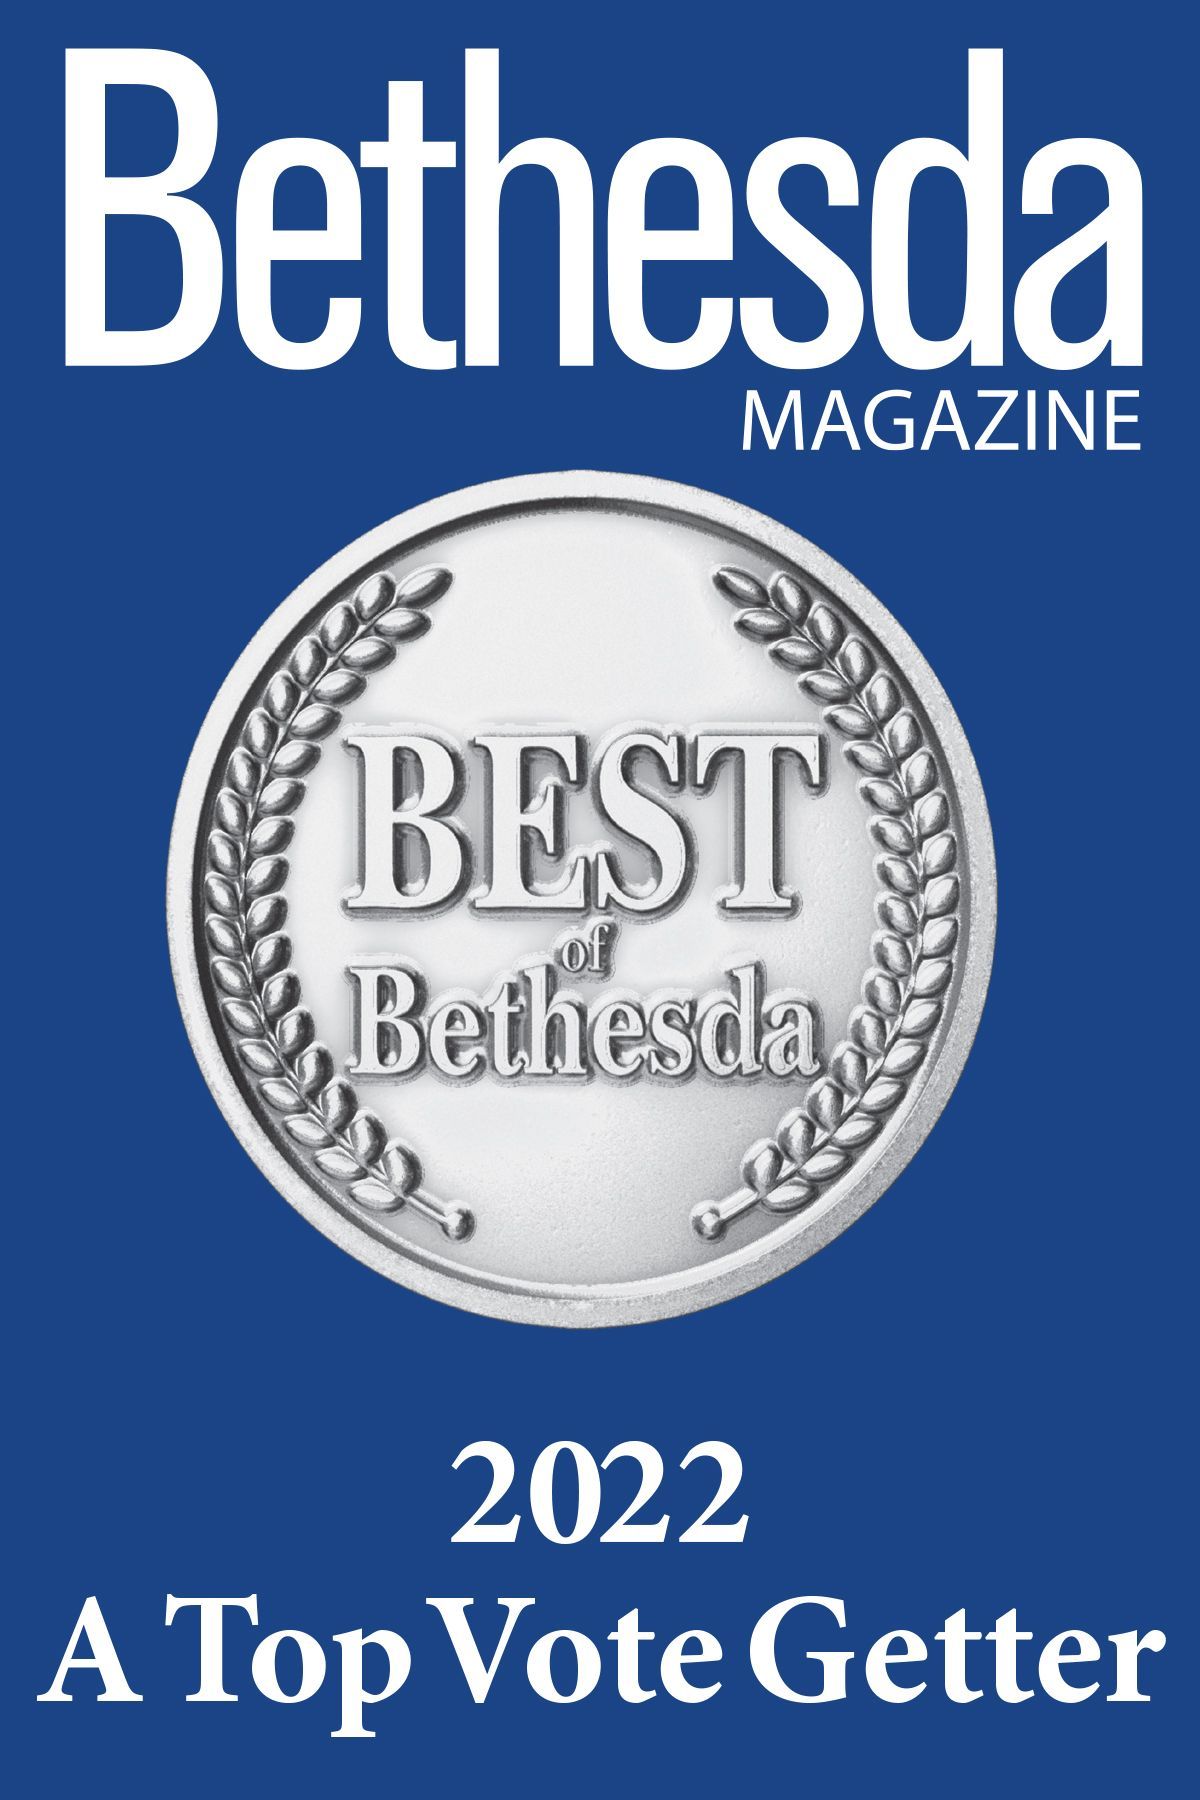 Gallery Photo of Potomac Therapy Group has been named a top vote-getter in Bethesda Magazine's 2022 Best of Bethesda readers' poll.